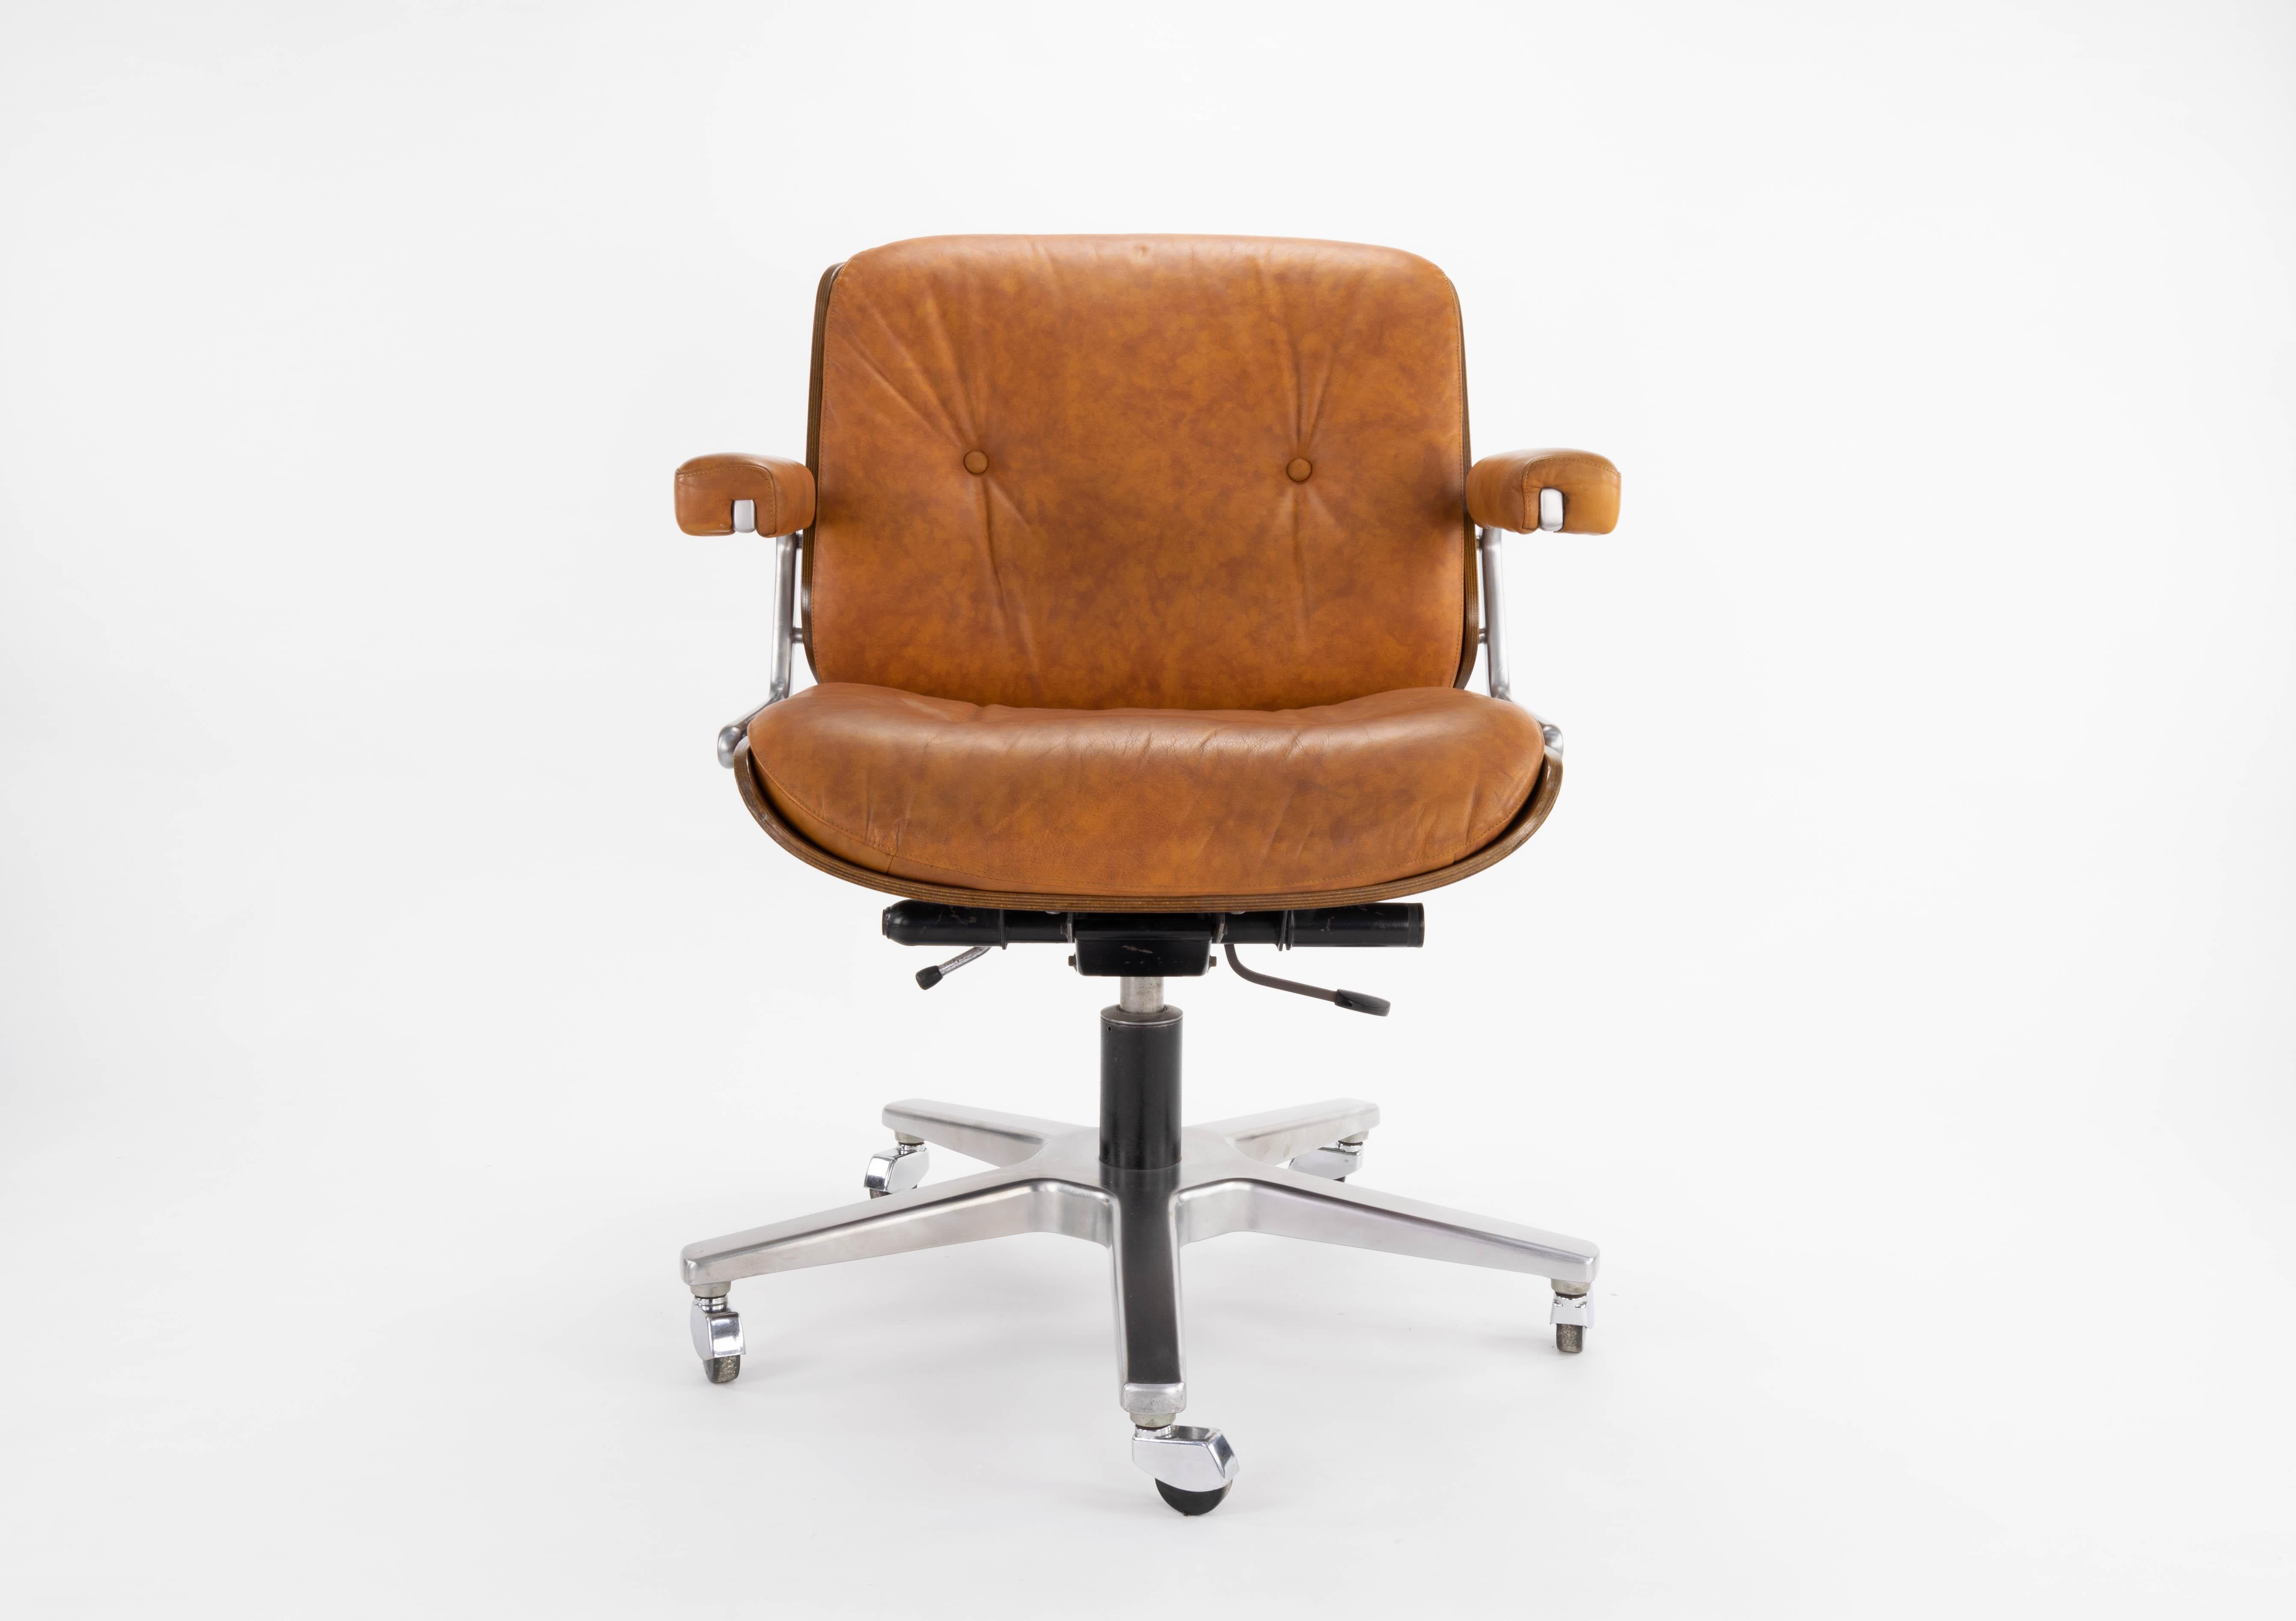 Armchair designed by Martin Stoll for the Swiss firm Giroflex in the 1960s. Laminated wood structure, original camel leather upholstery in very good condition. The chair is swivel and adjustable in height and inclination. All their fish are original